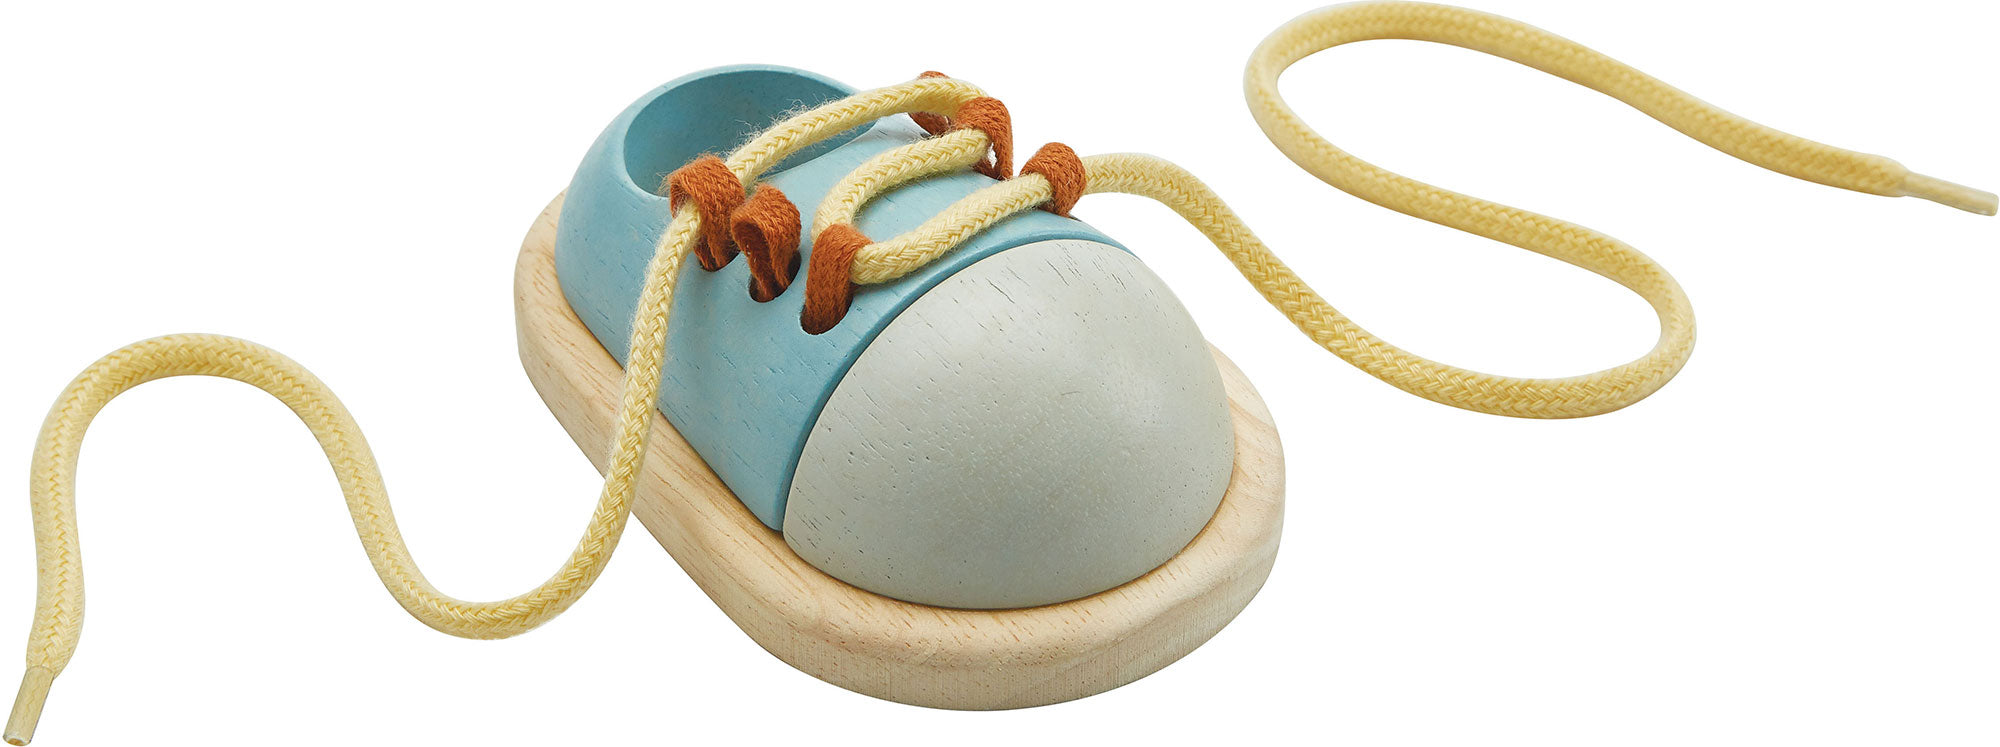 Wooden Toy Tie up Shoe Orchard Collection - Plan Toys